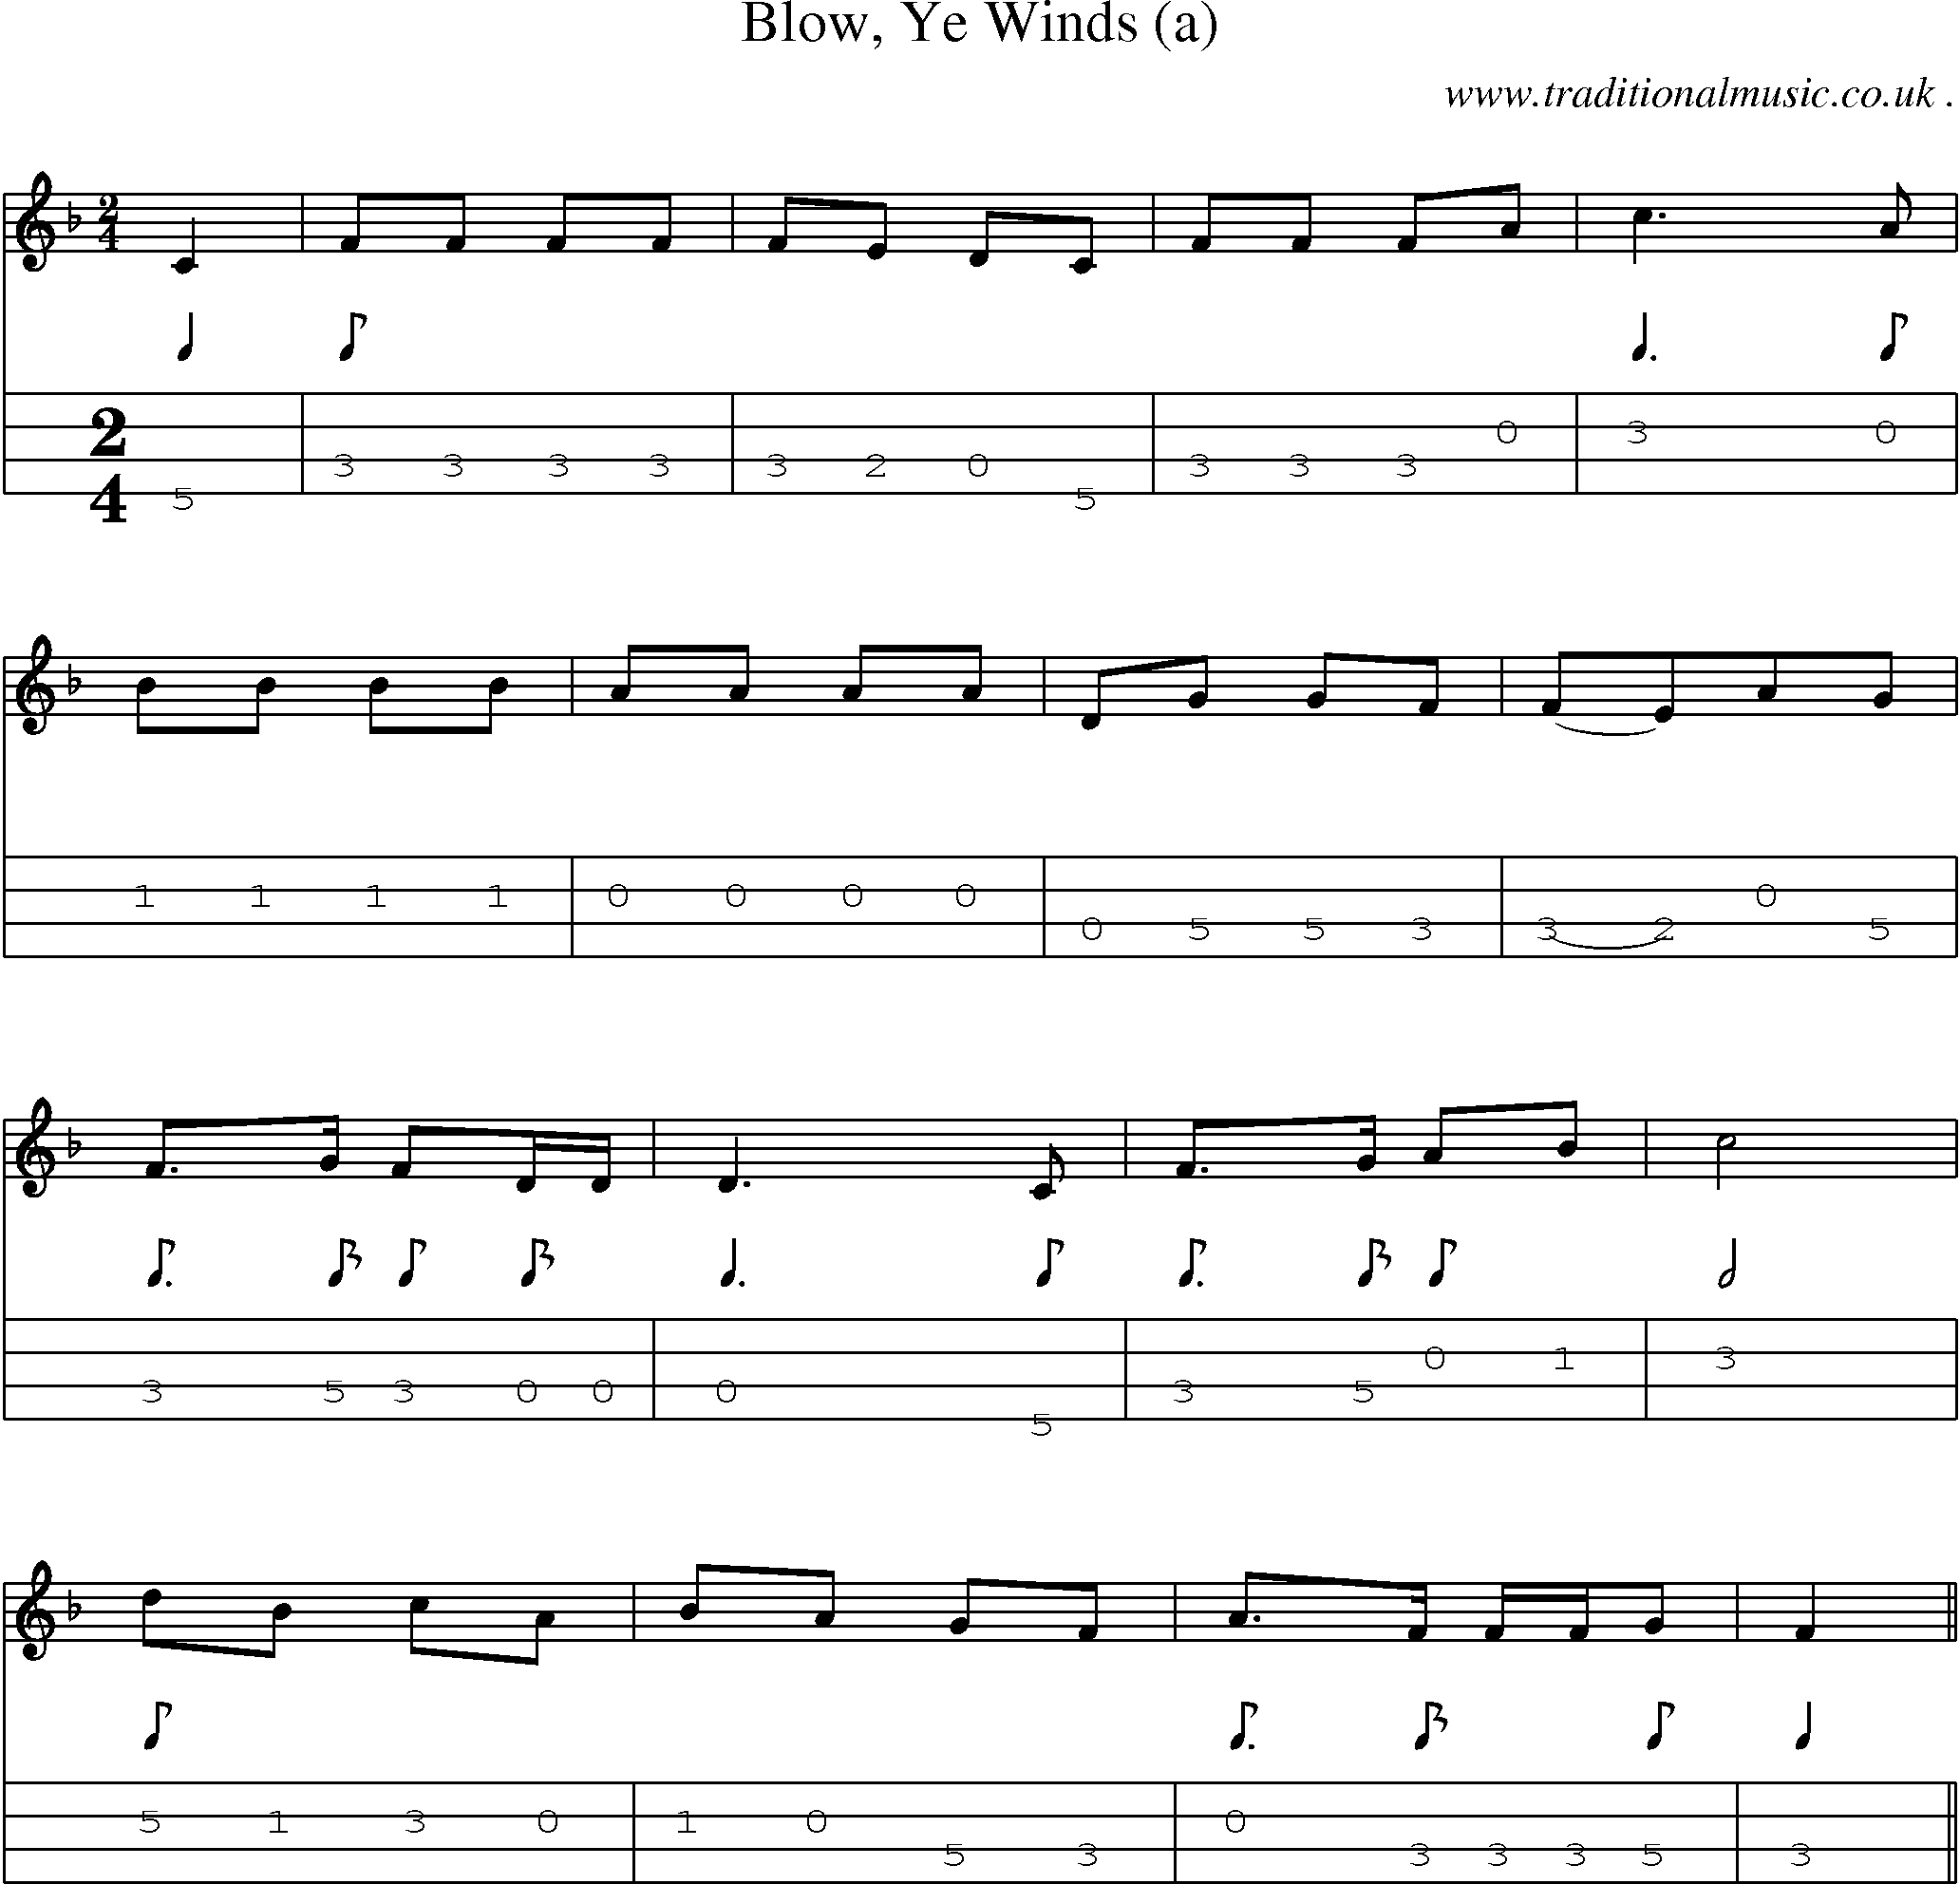 Sheet-Music and Mandolin Tabs for Blow Ye Winds (a)